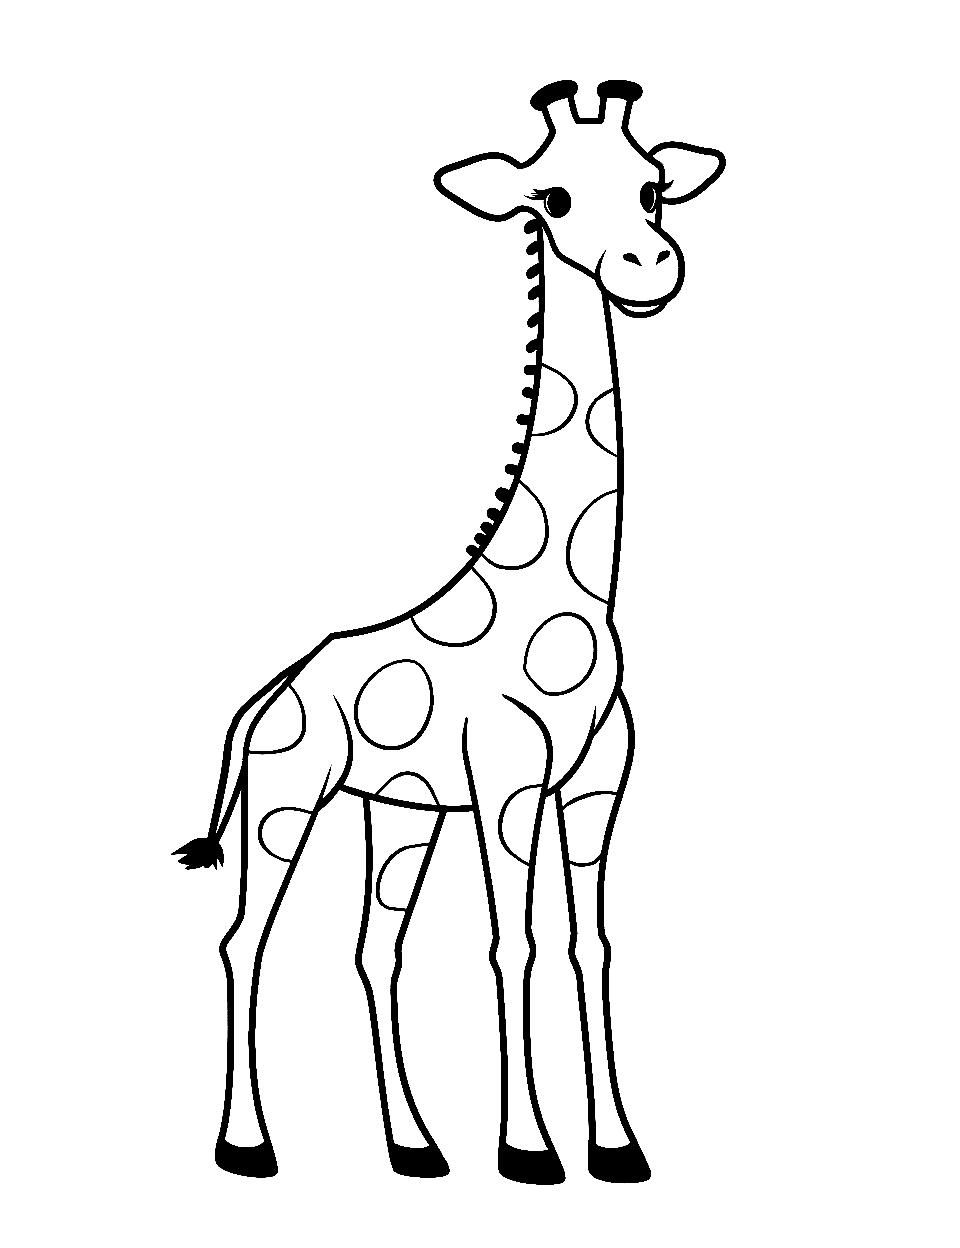 How to Draw a Giraffe - Easy Drawing Tutorial For Kids